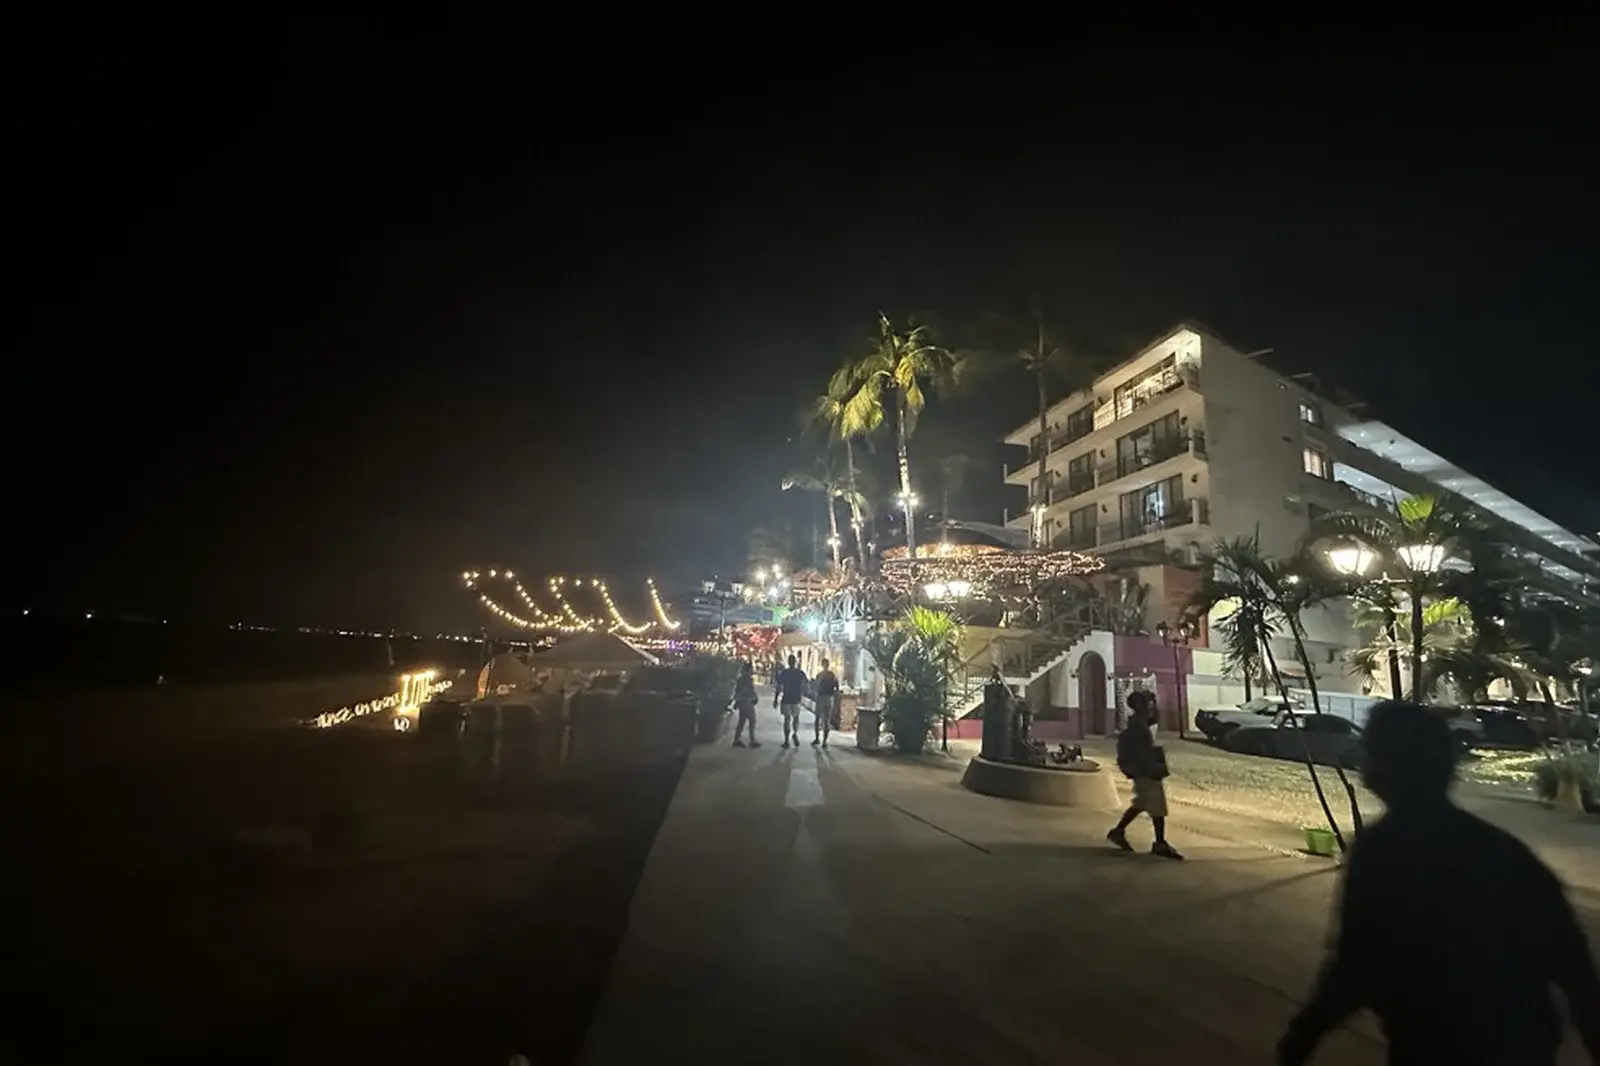 A photograph of the boardwalk along the beach at night.